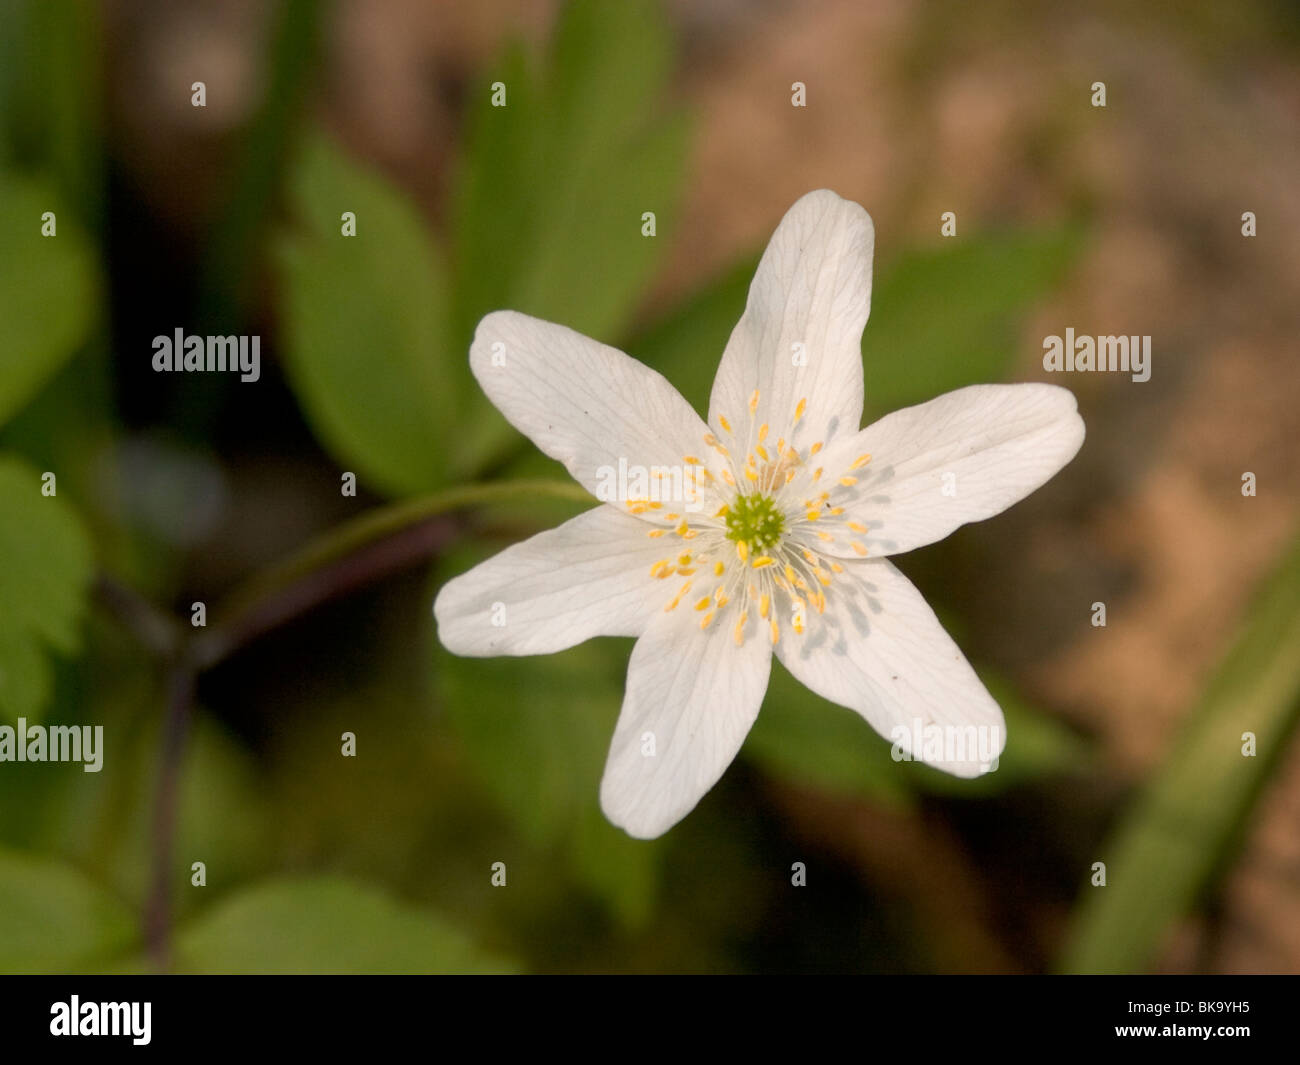 Close up of the white flower of a Wood Anemone. Stock Photo